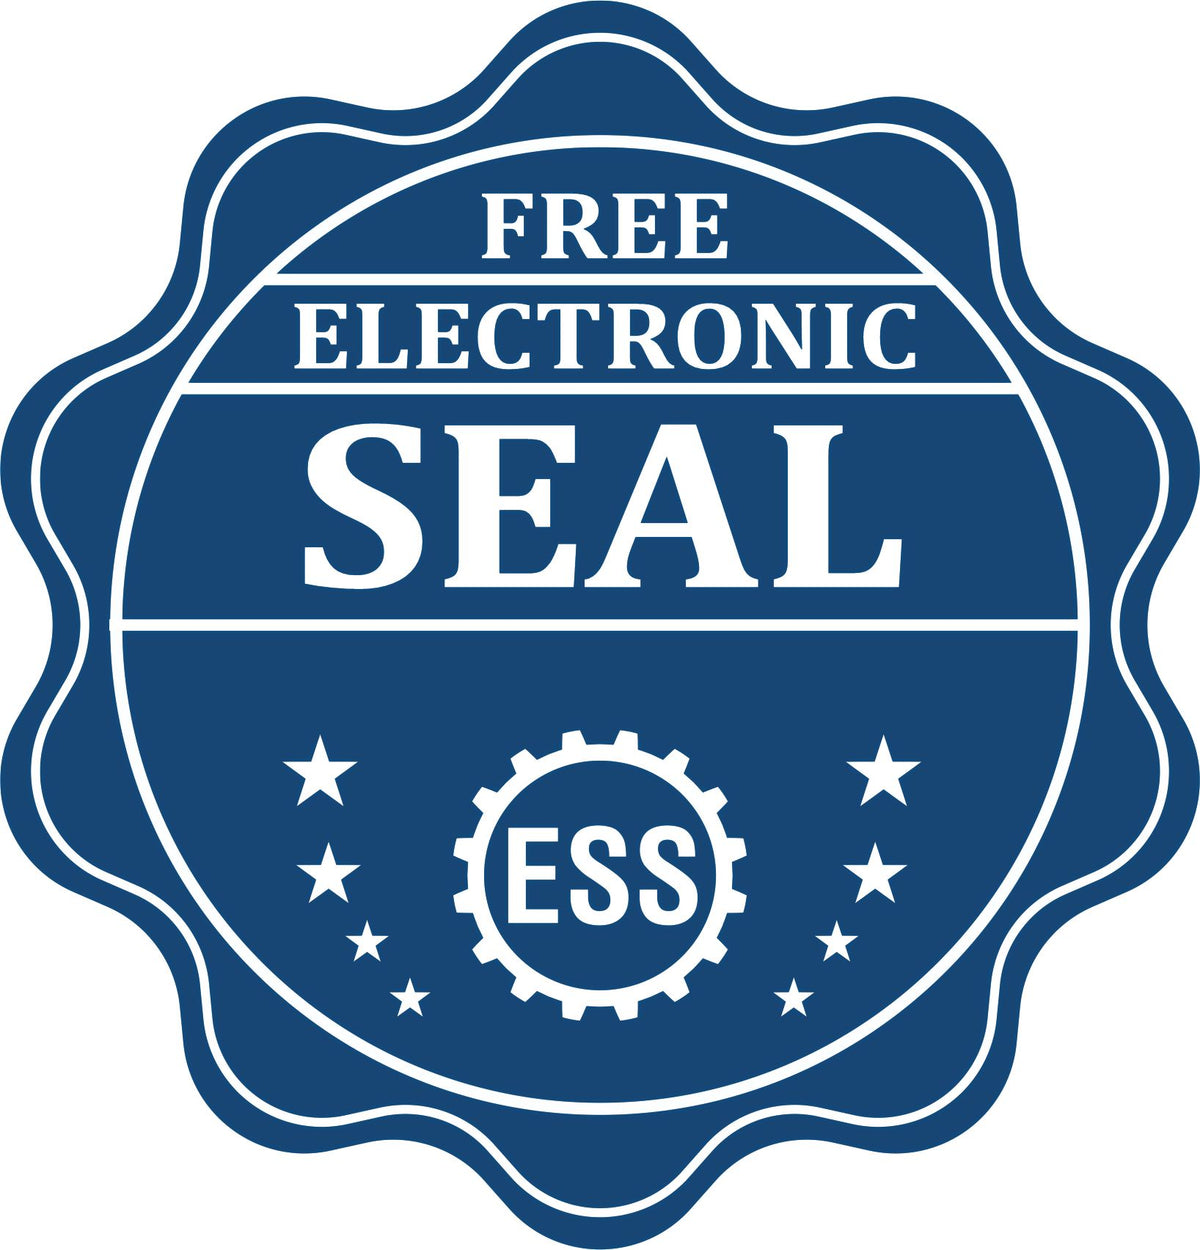 A badge showing a free electronic seal for the Hybrid North Carolina Land Surveyor Seal with stars and the ESS gear on the emblem.